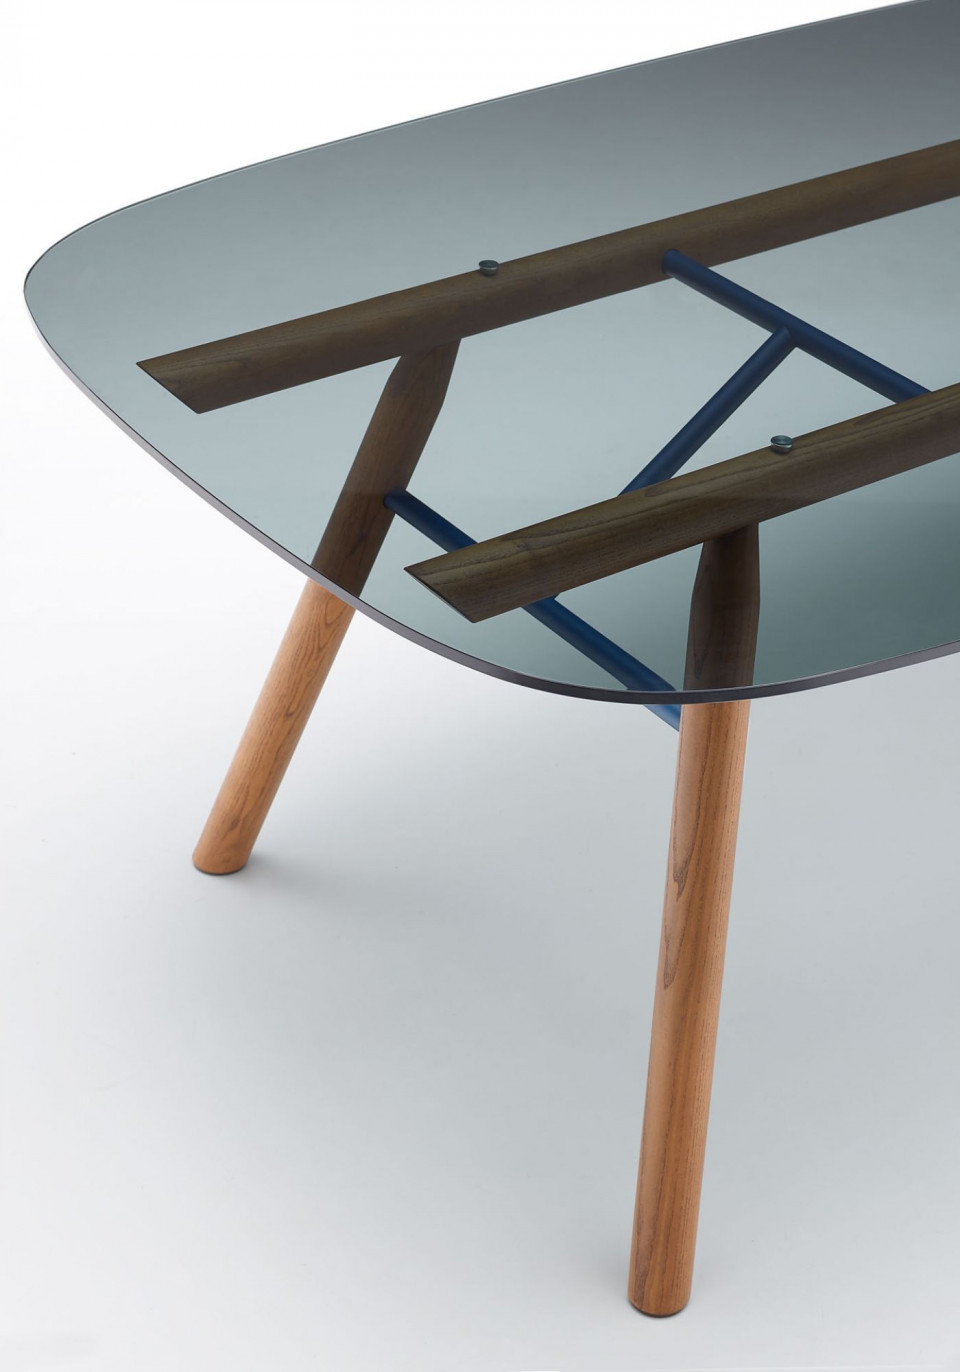 Suite table by MIDJ